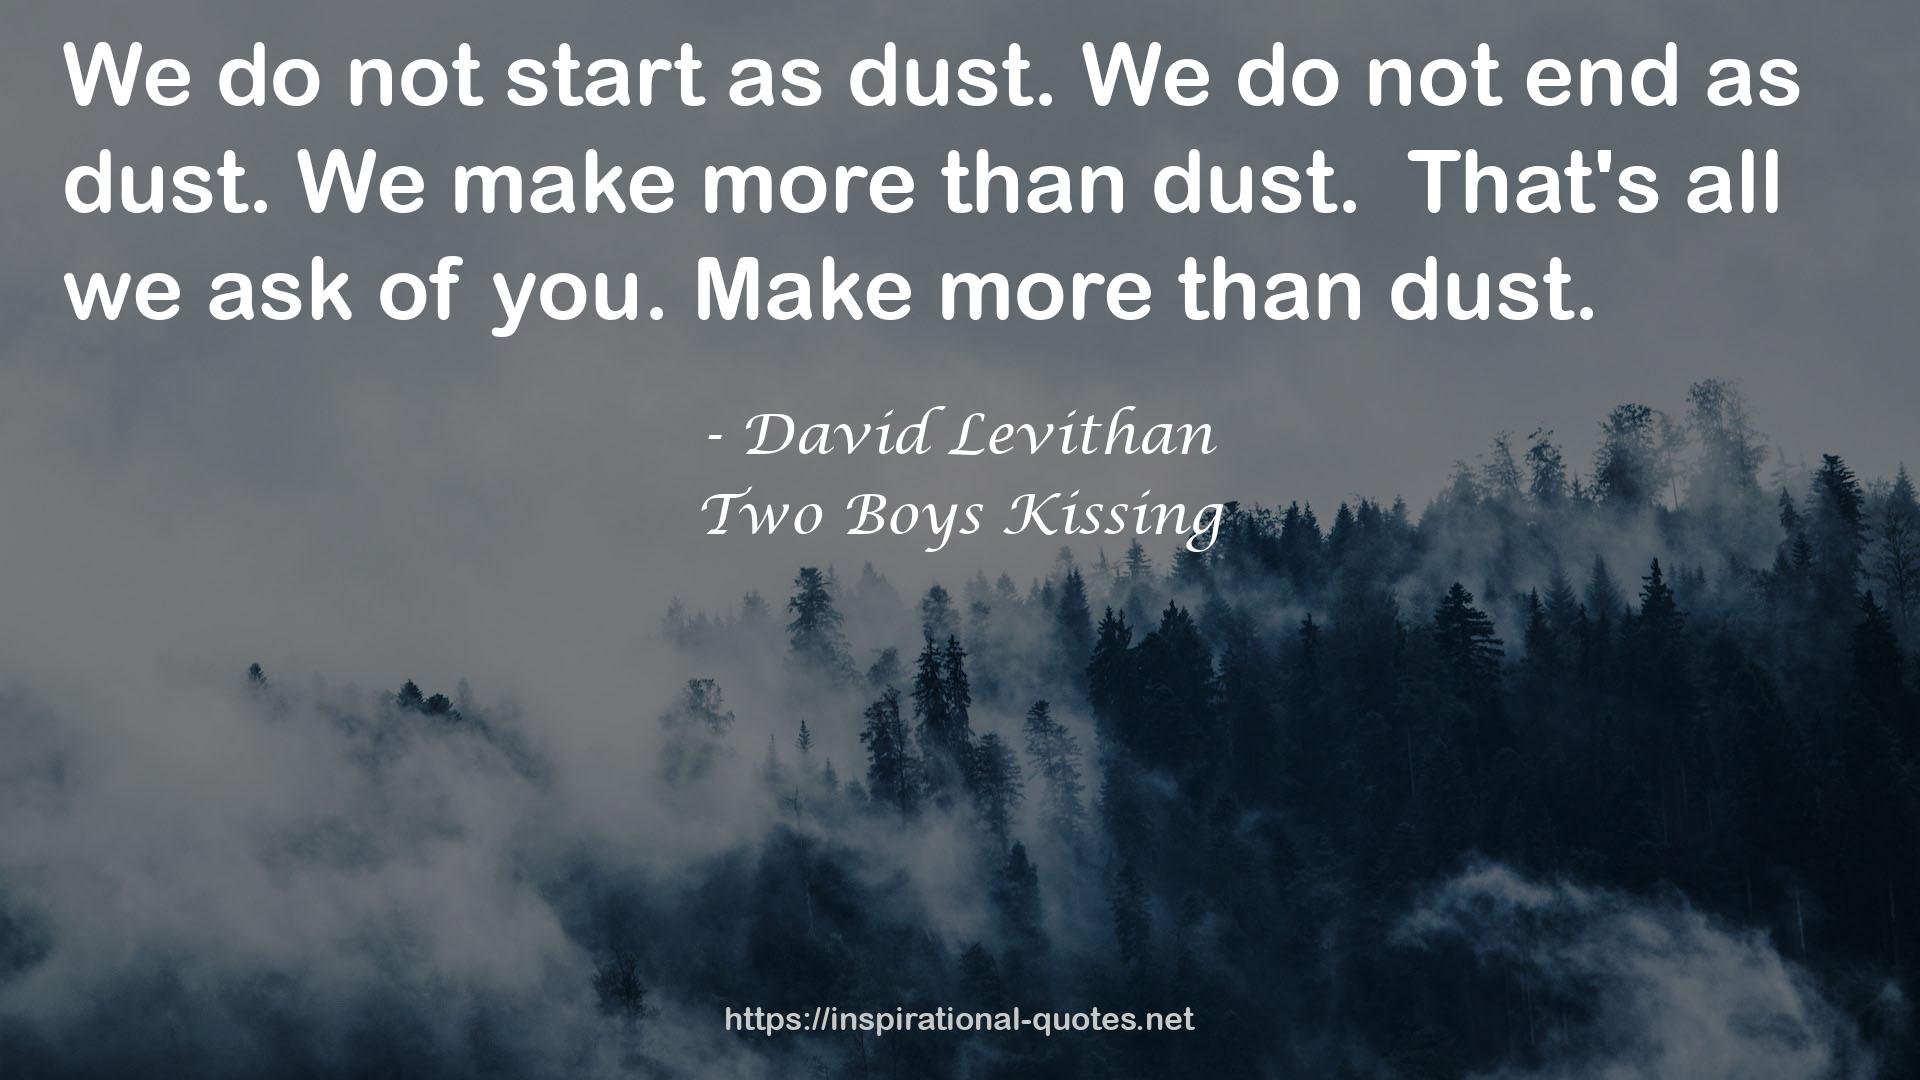 Two Boys Kissing QUOTES